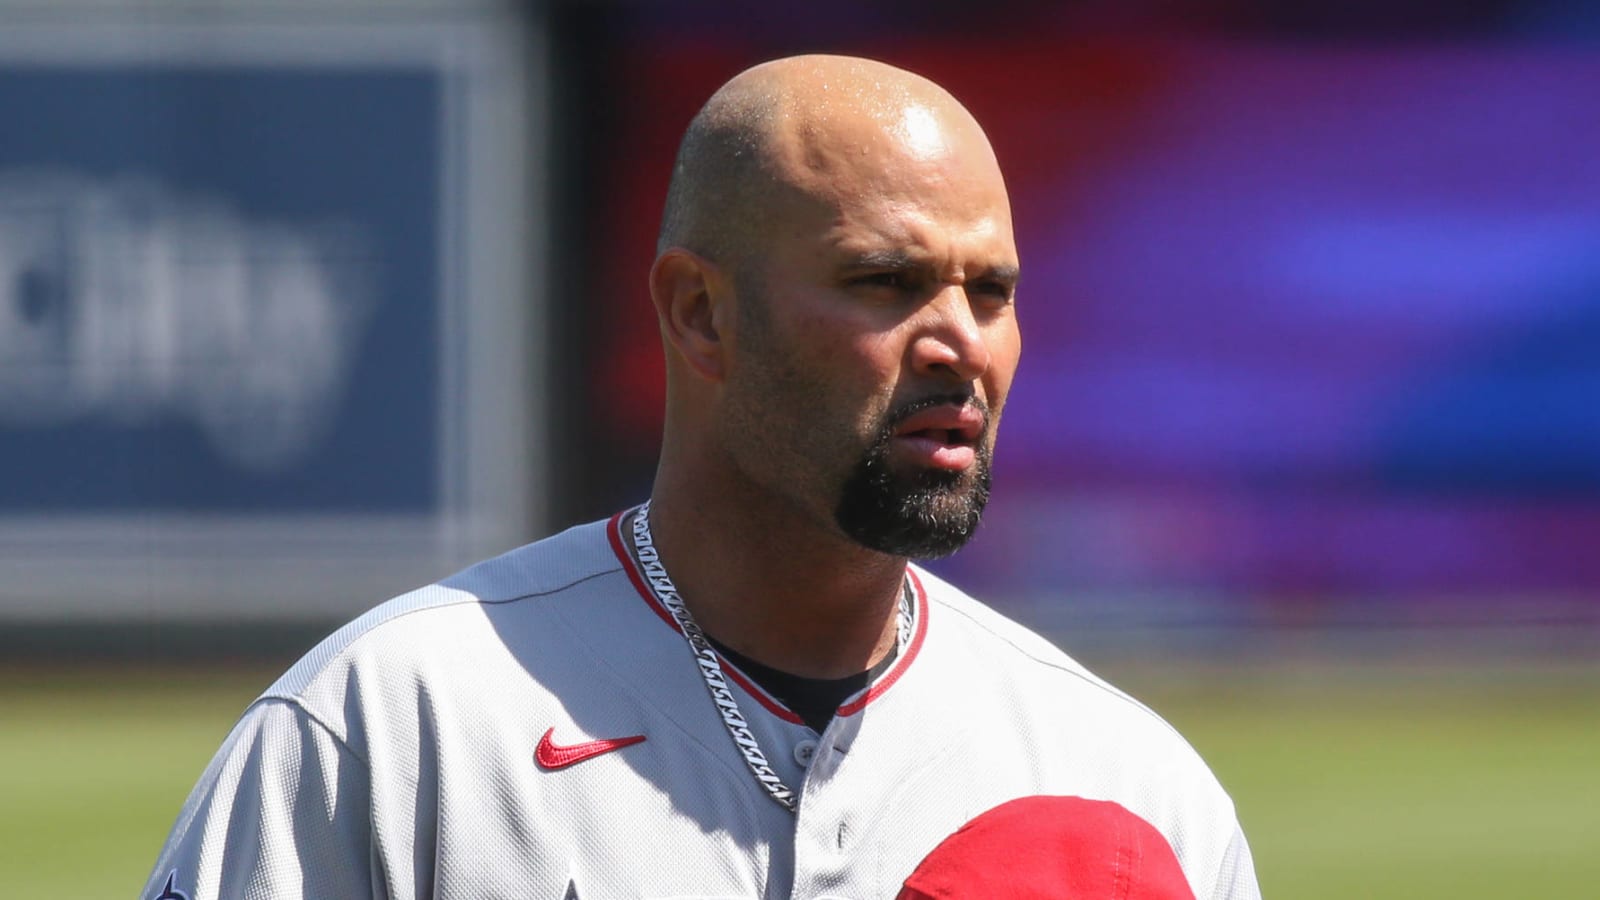 Albert Pujols signs with Los Angeles Dodgers